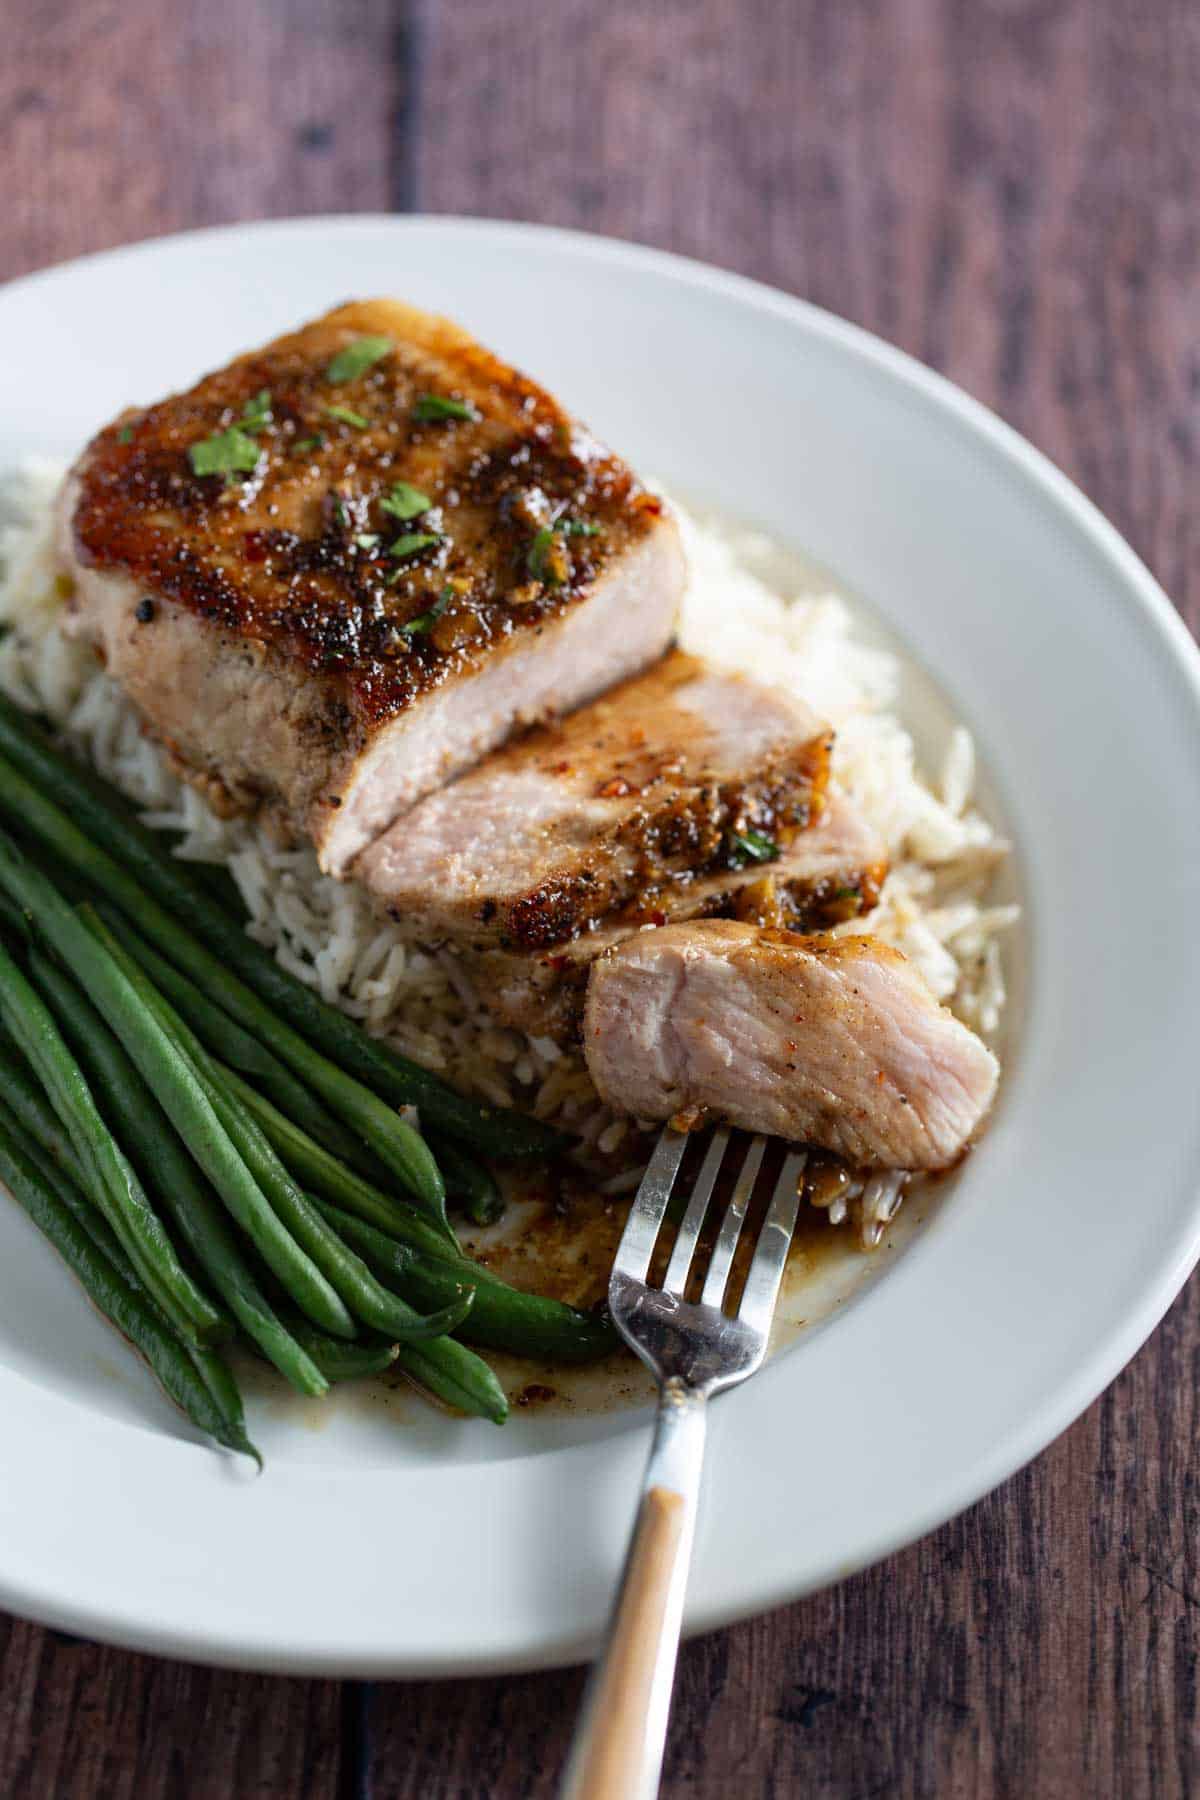 Grilled pork chop on a bed of rice with green beans, garnished with herbs, served on a white plate with a fork.